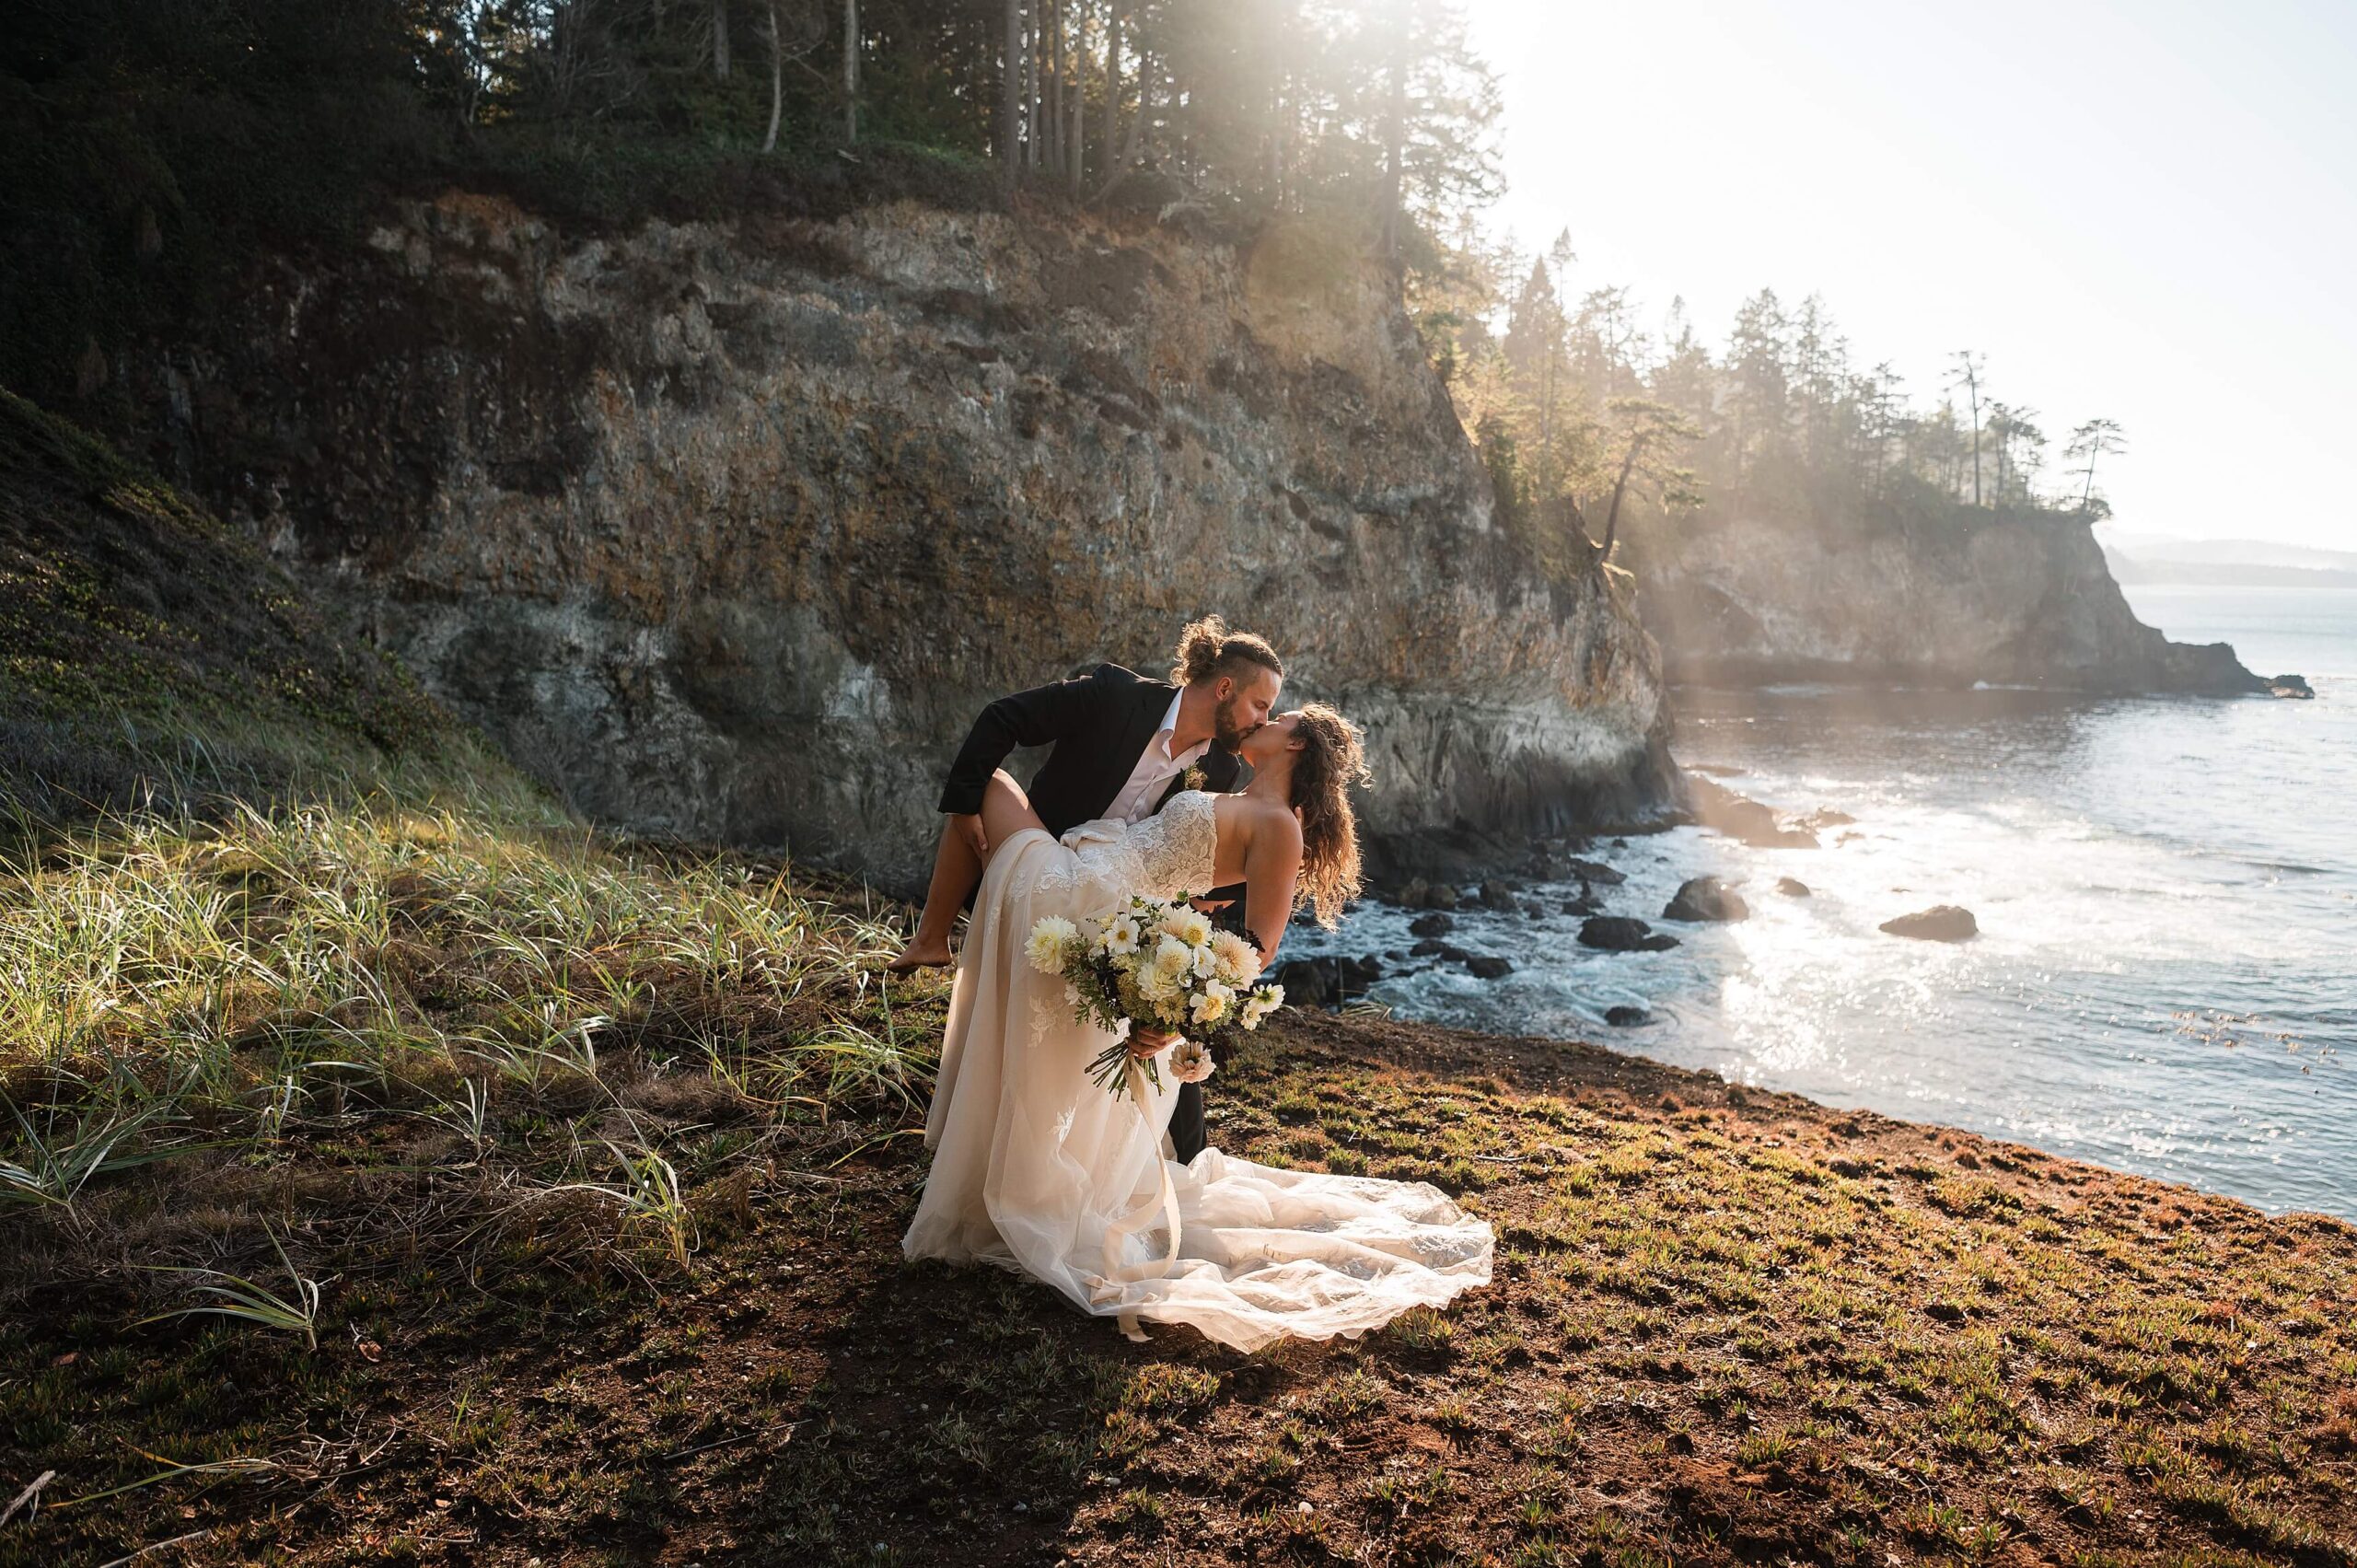 Bride and groom eloping at sunset on a cliff on the Washington Coast